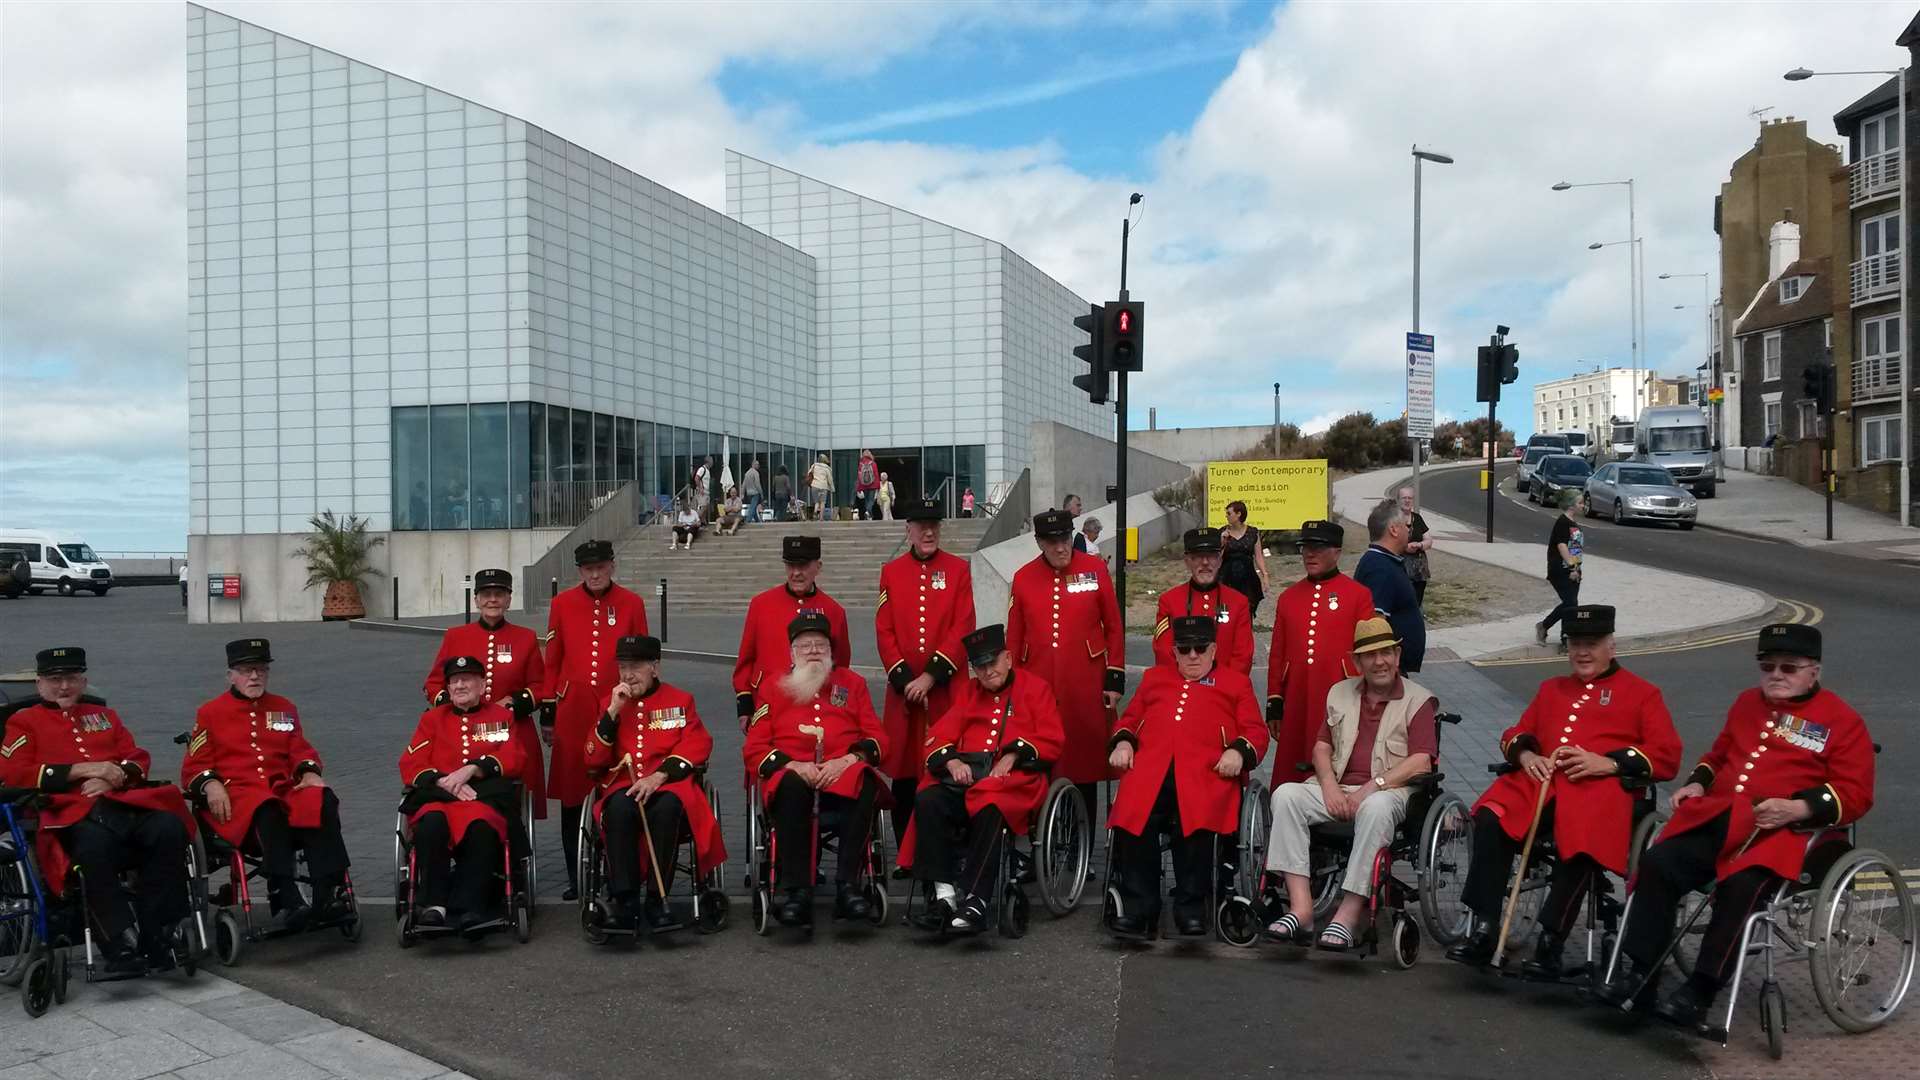 The Chelsea Pensioners in front of Margate's Turner Contemporary